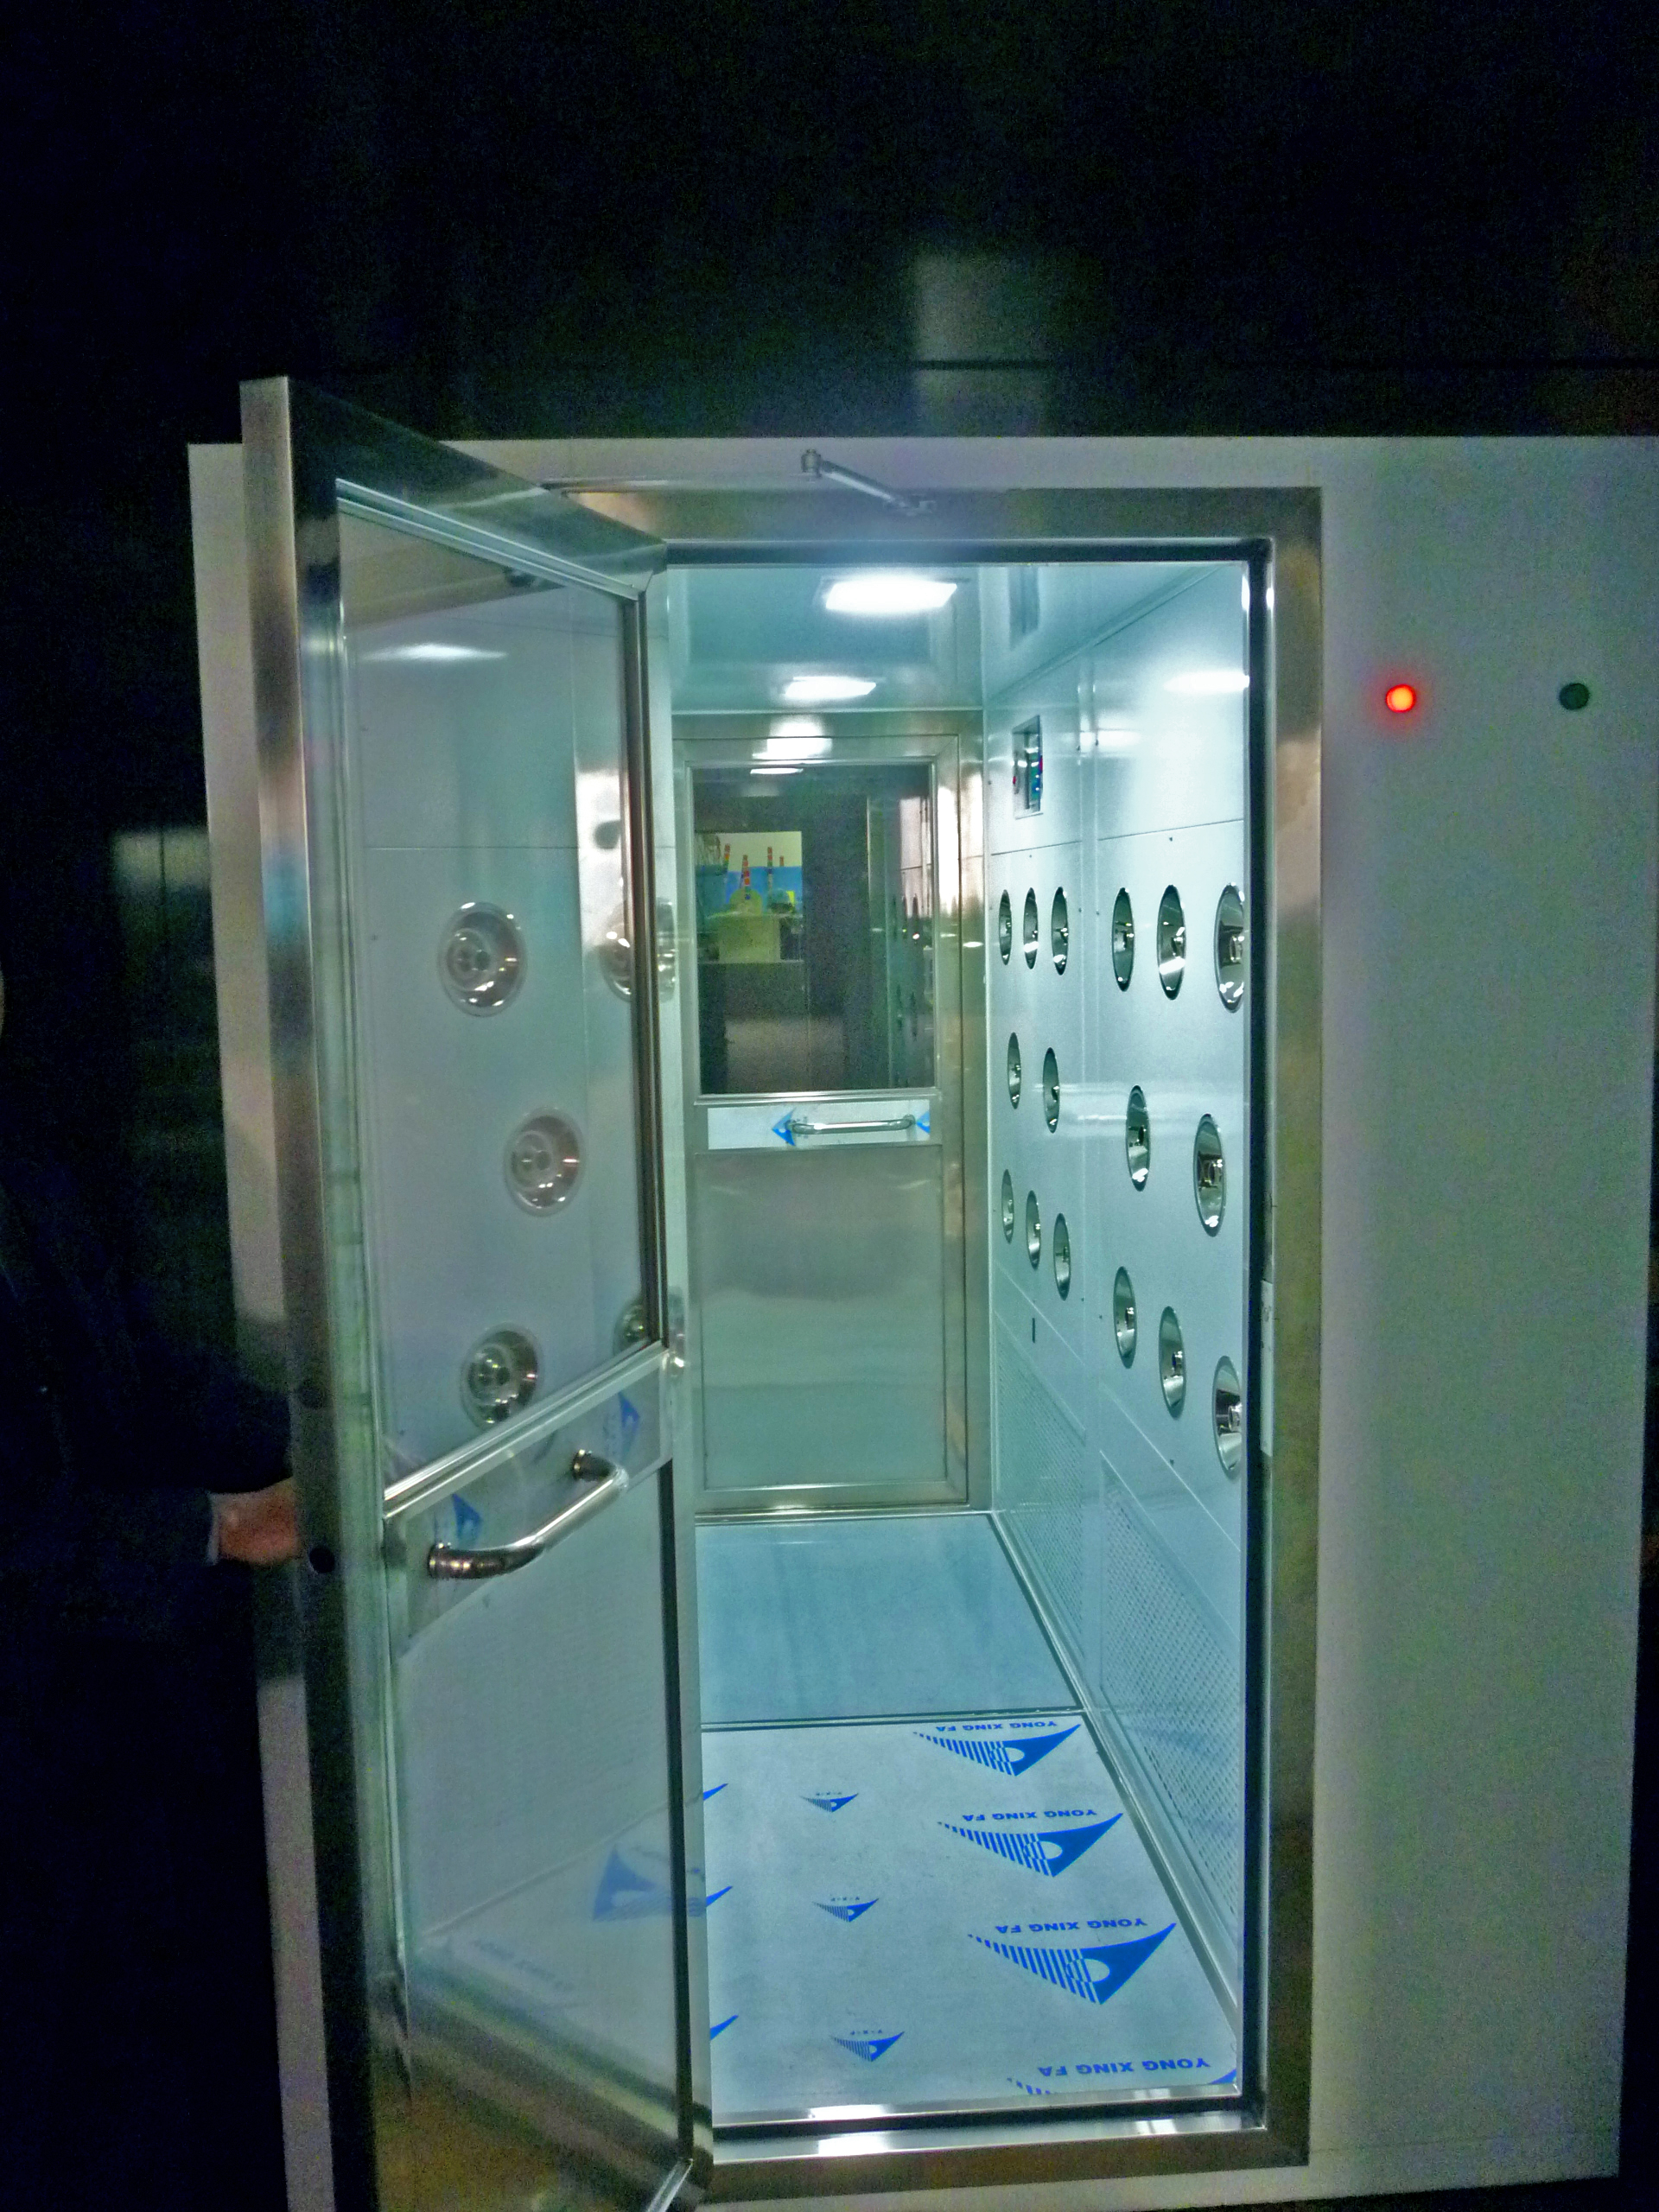 Cargo Air Shower for Microelectronics Industry Cleanroom